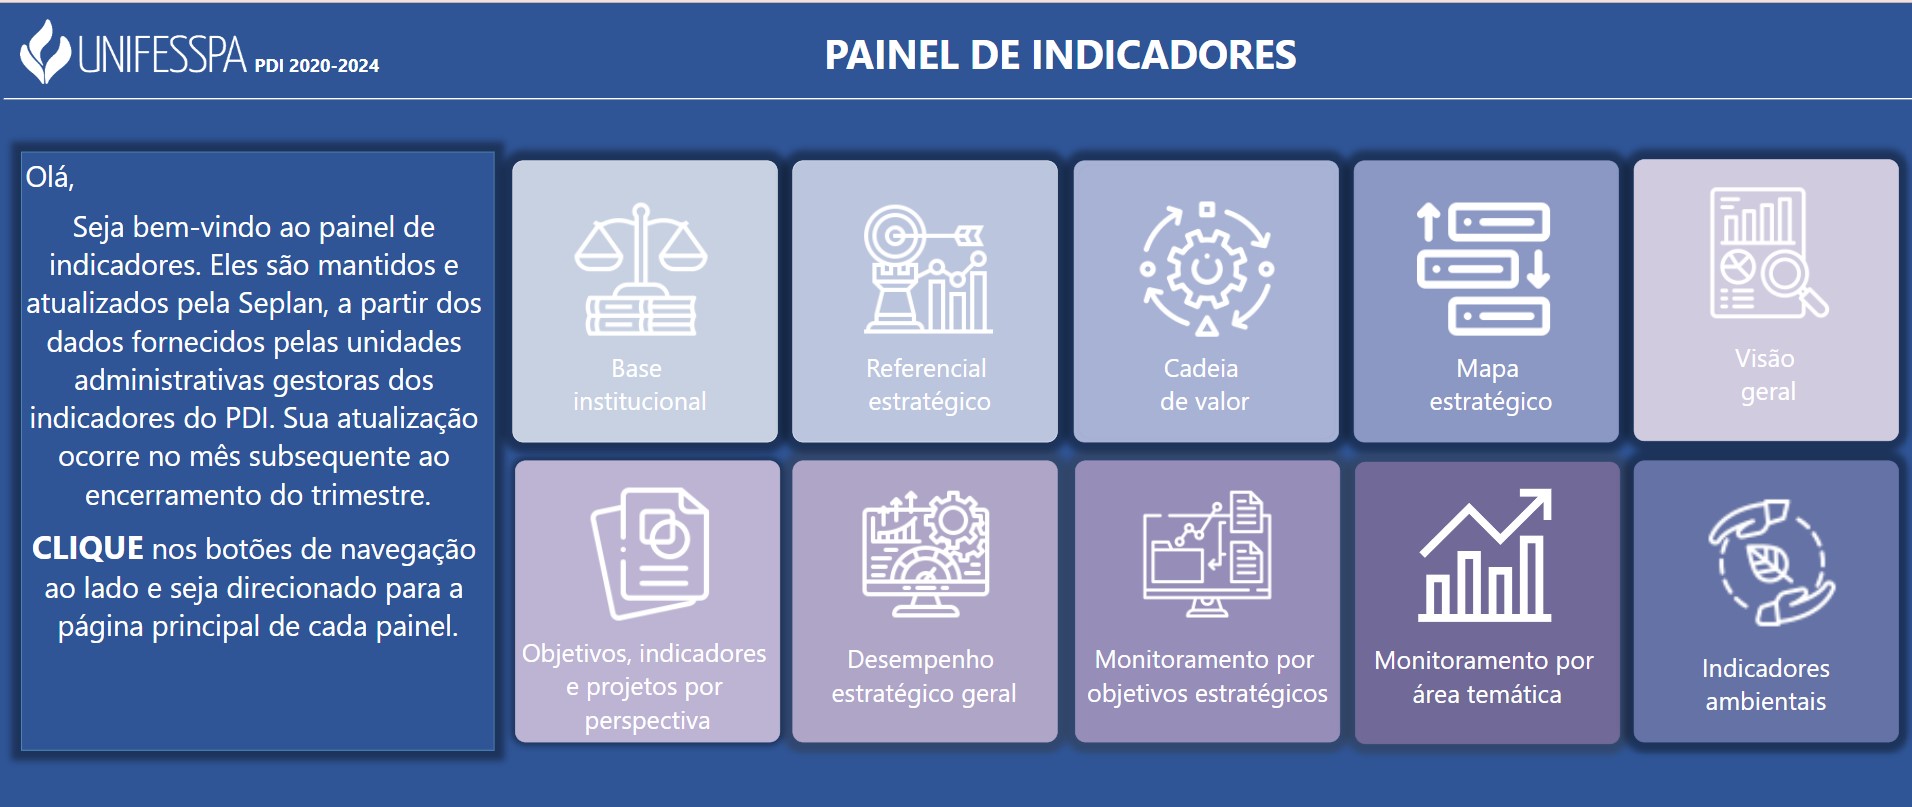 painel indicadores